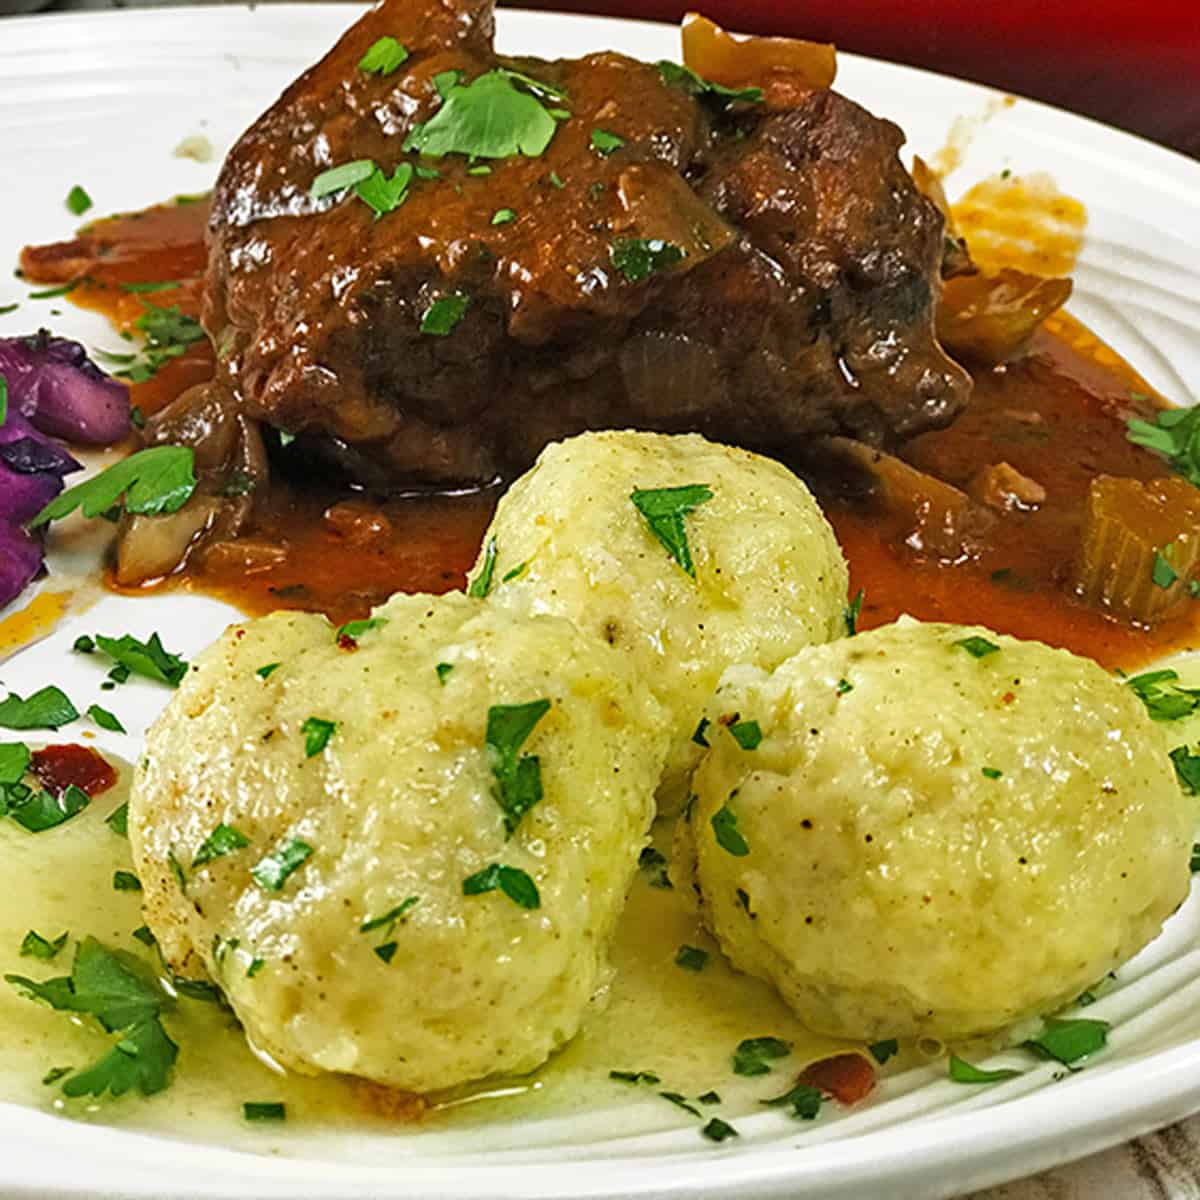 A plate of meat and potato dumplings.